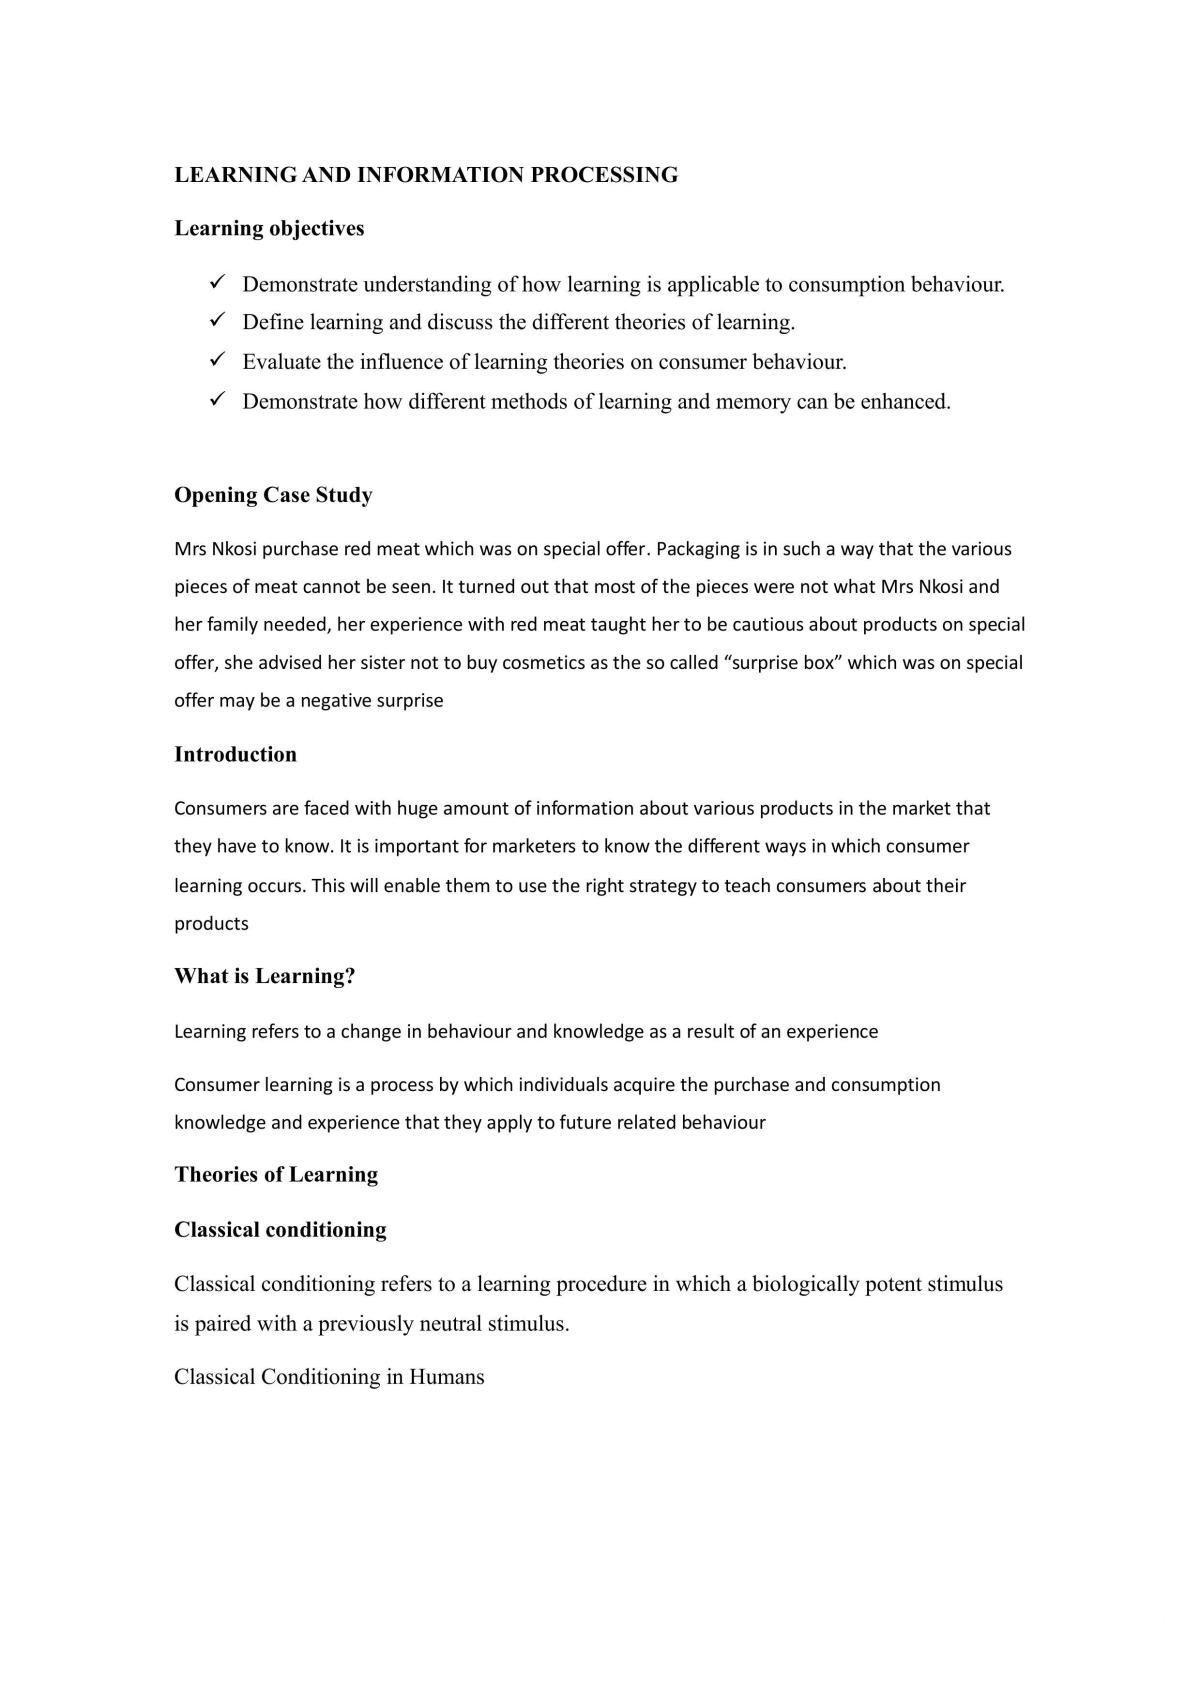 Notes on Learning and Information Processing - Page 1